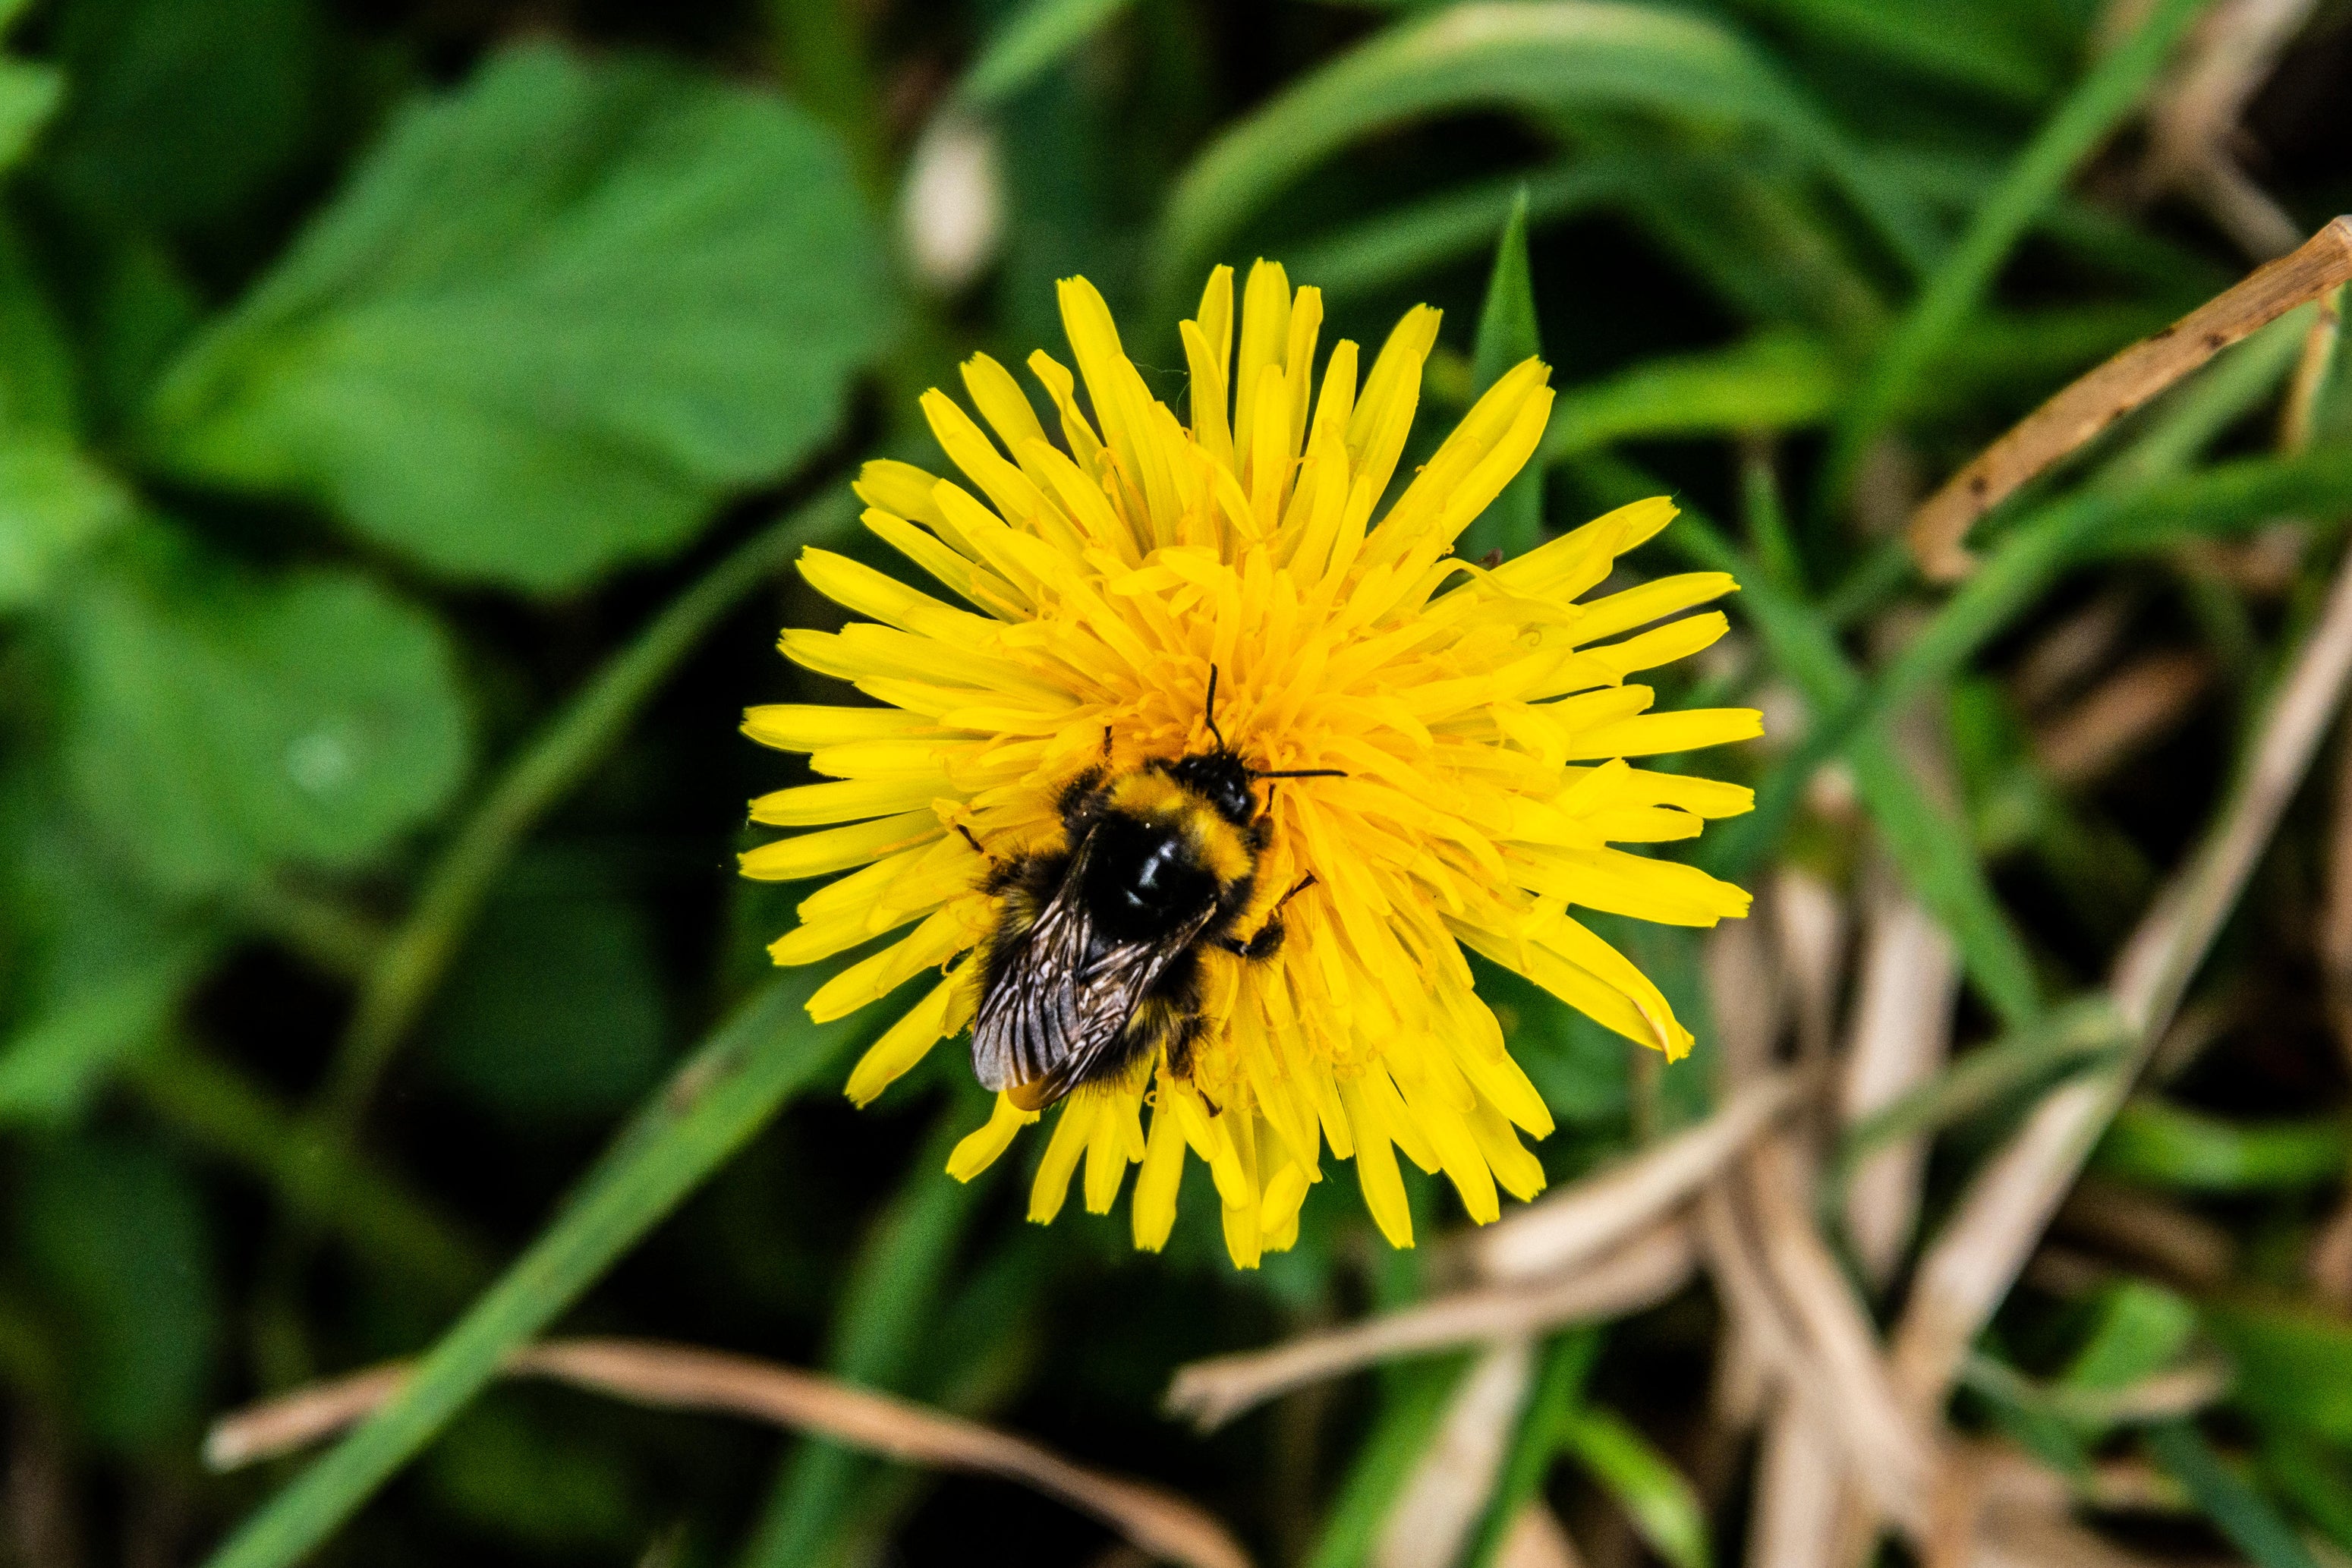 Allowing ‘weeds’ like dandelions to grow provides a welcome boosts to pollinating insects like bees